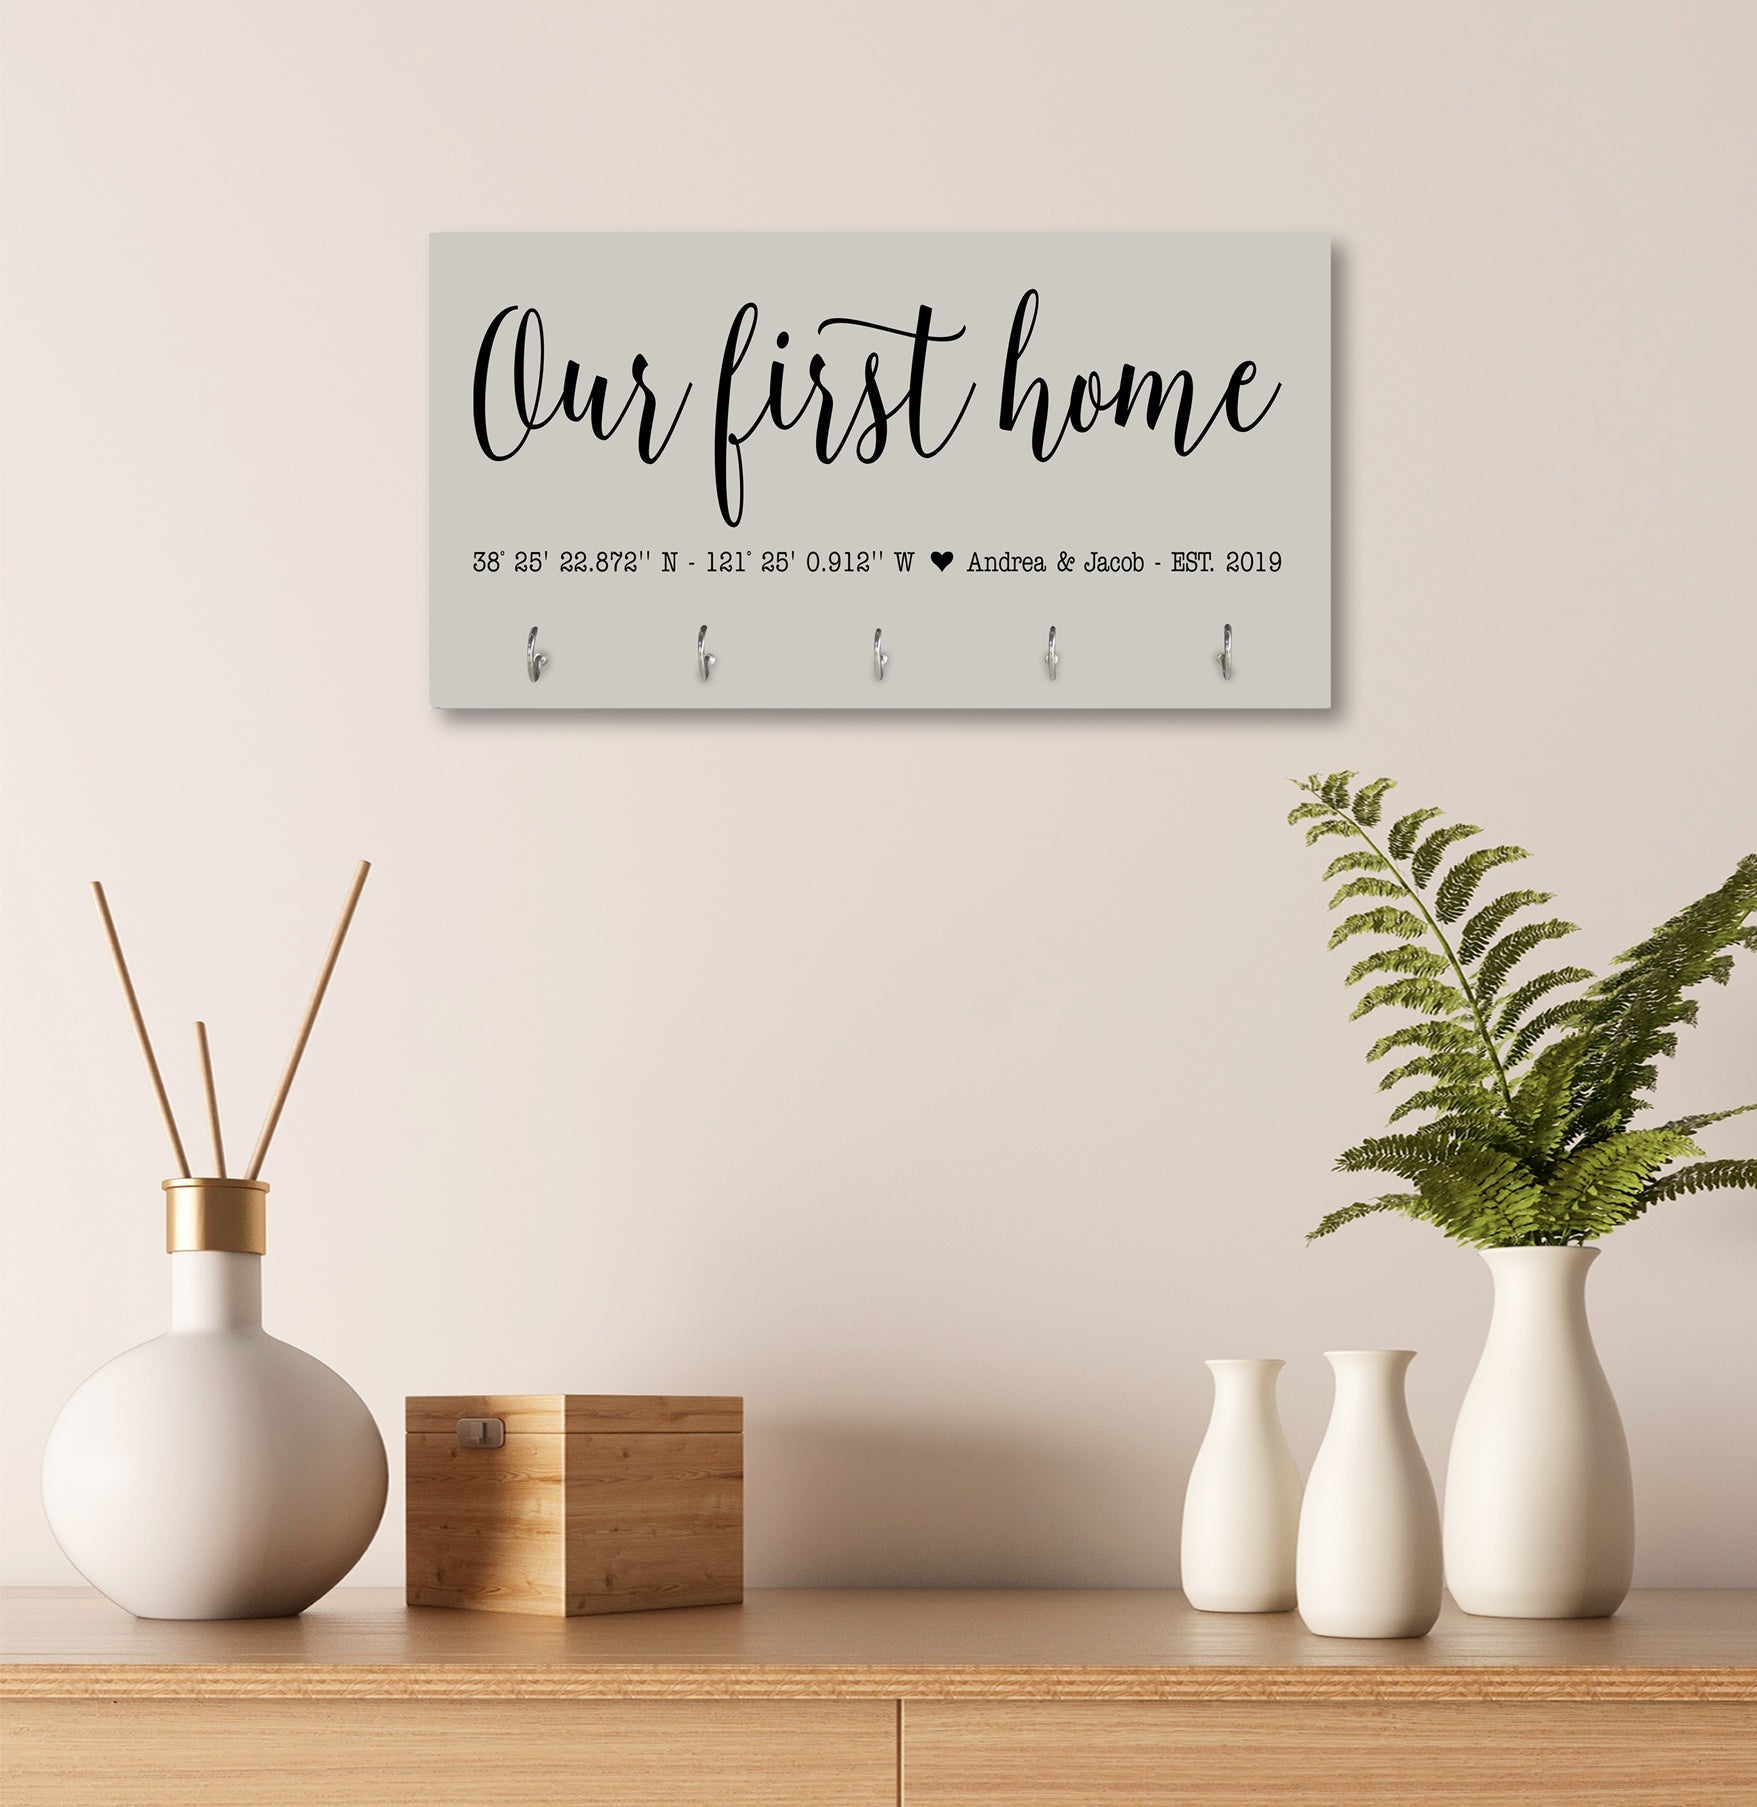 Personalized Established Key Holders - Coordinates Our First Home - LifeSong Milestones